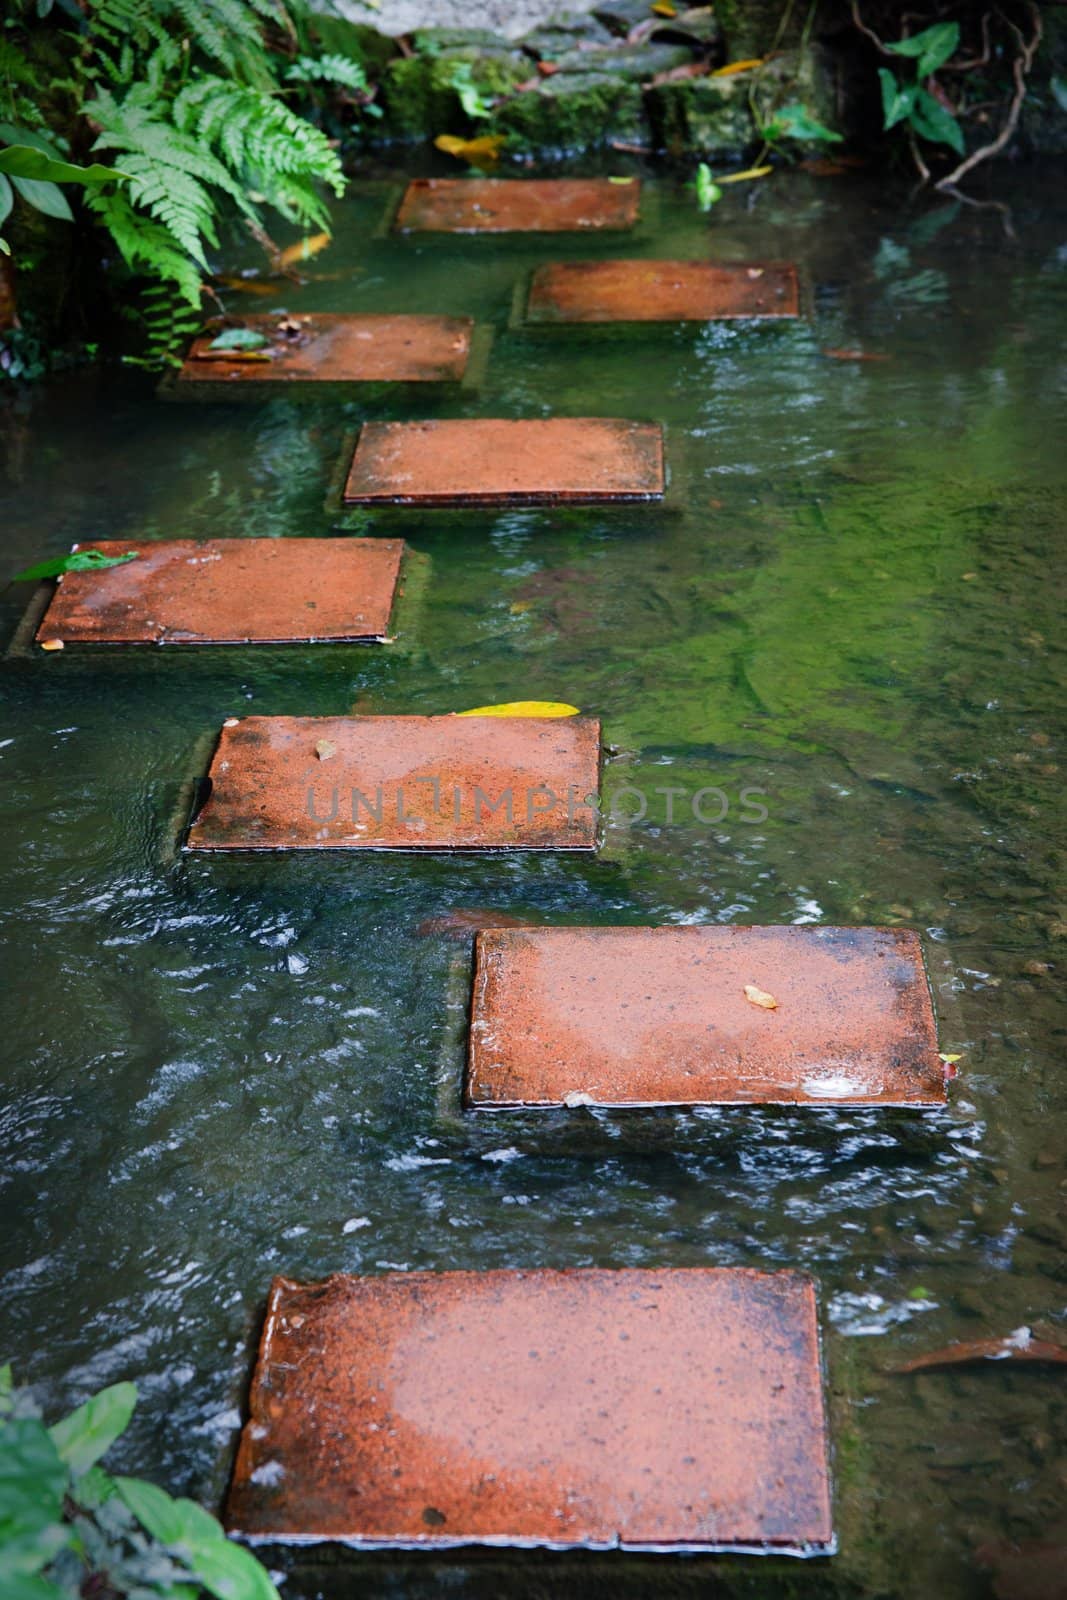 stepping stone tiles cross the river or stream